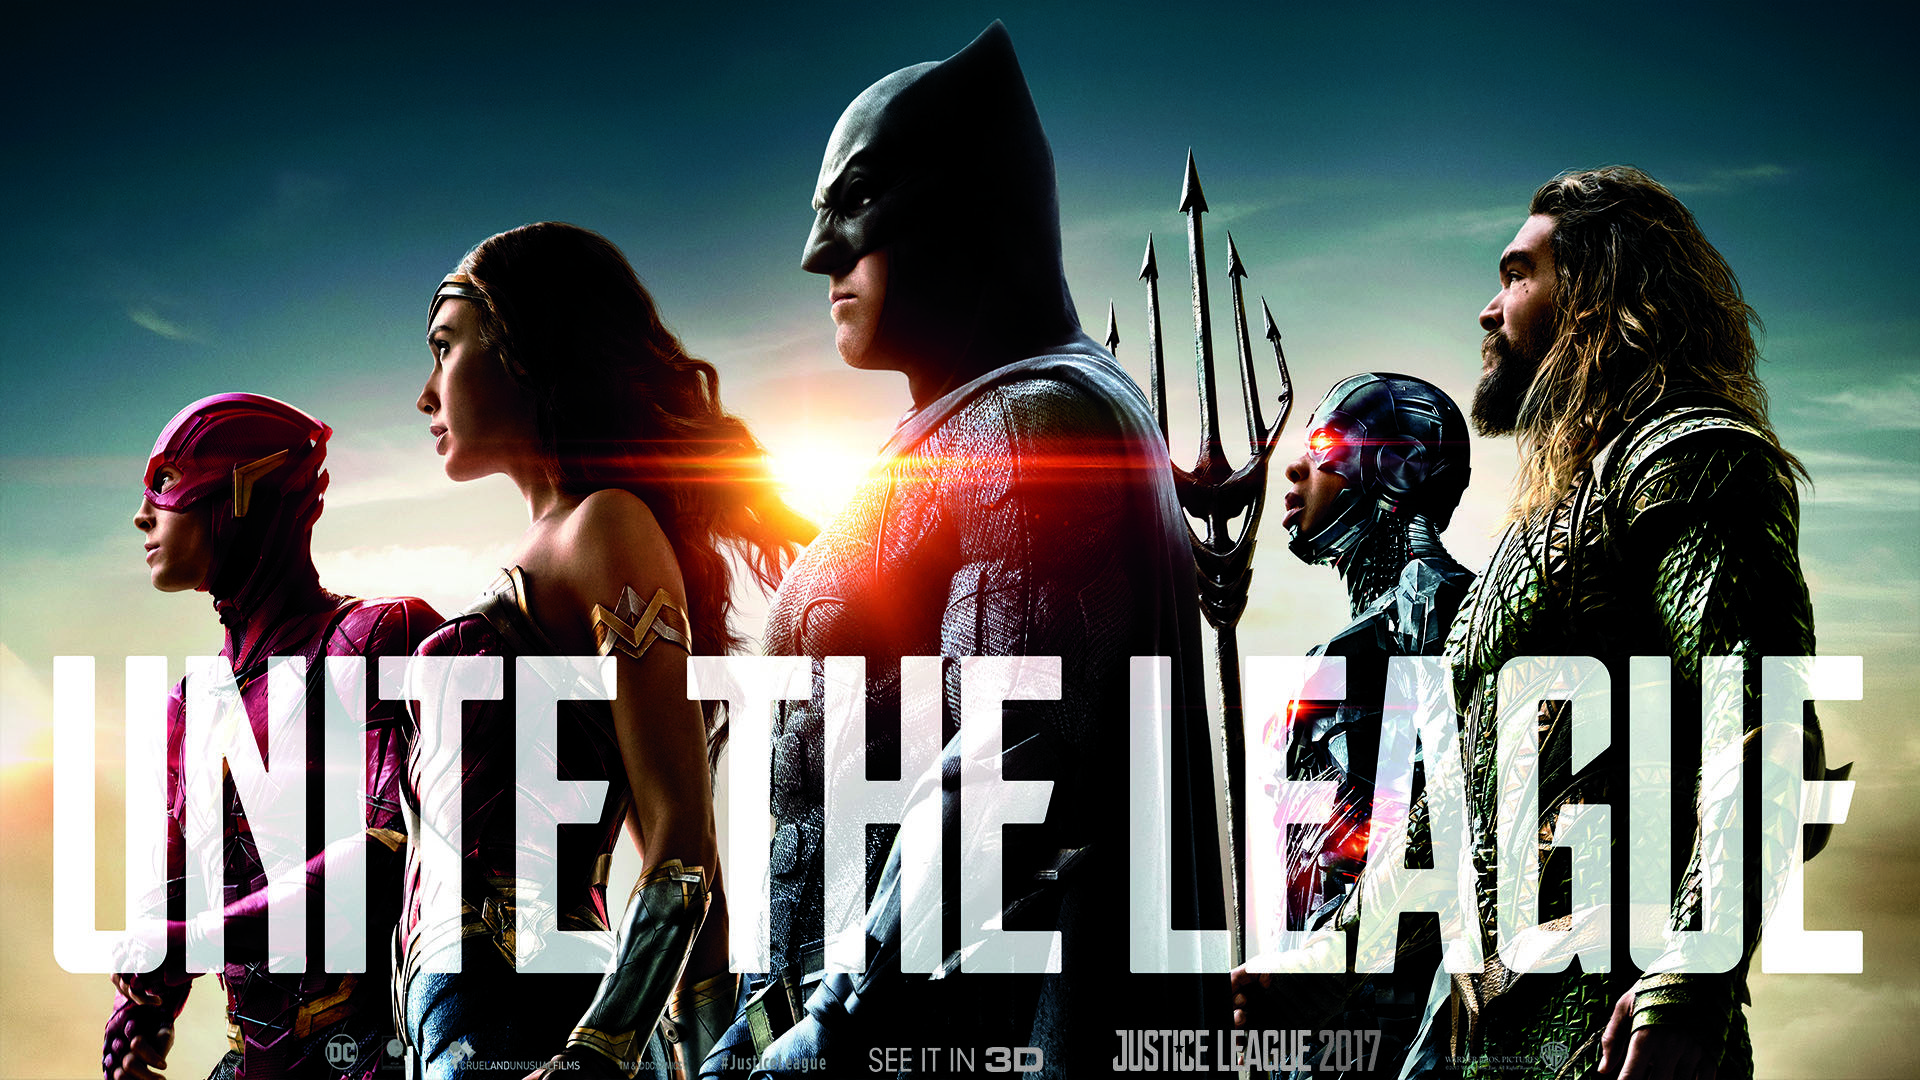 Is “Justice League” Zack Snyder's True Vision?